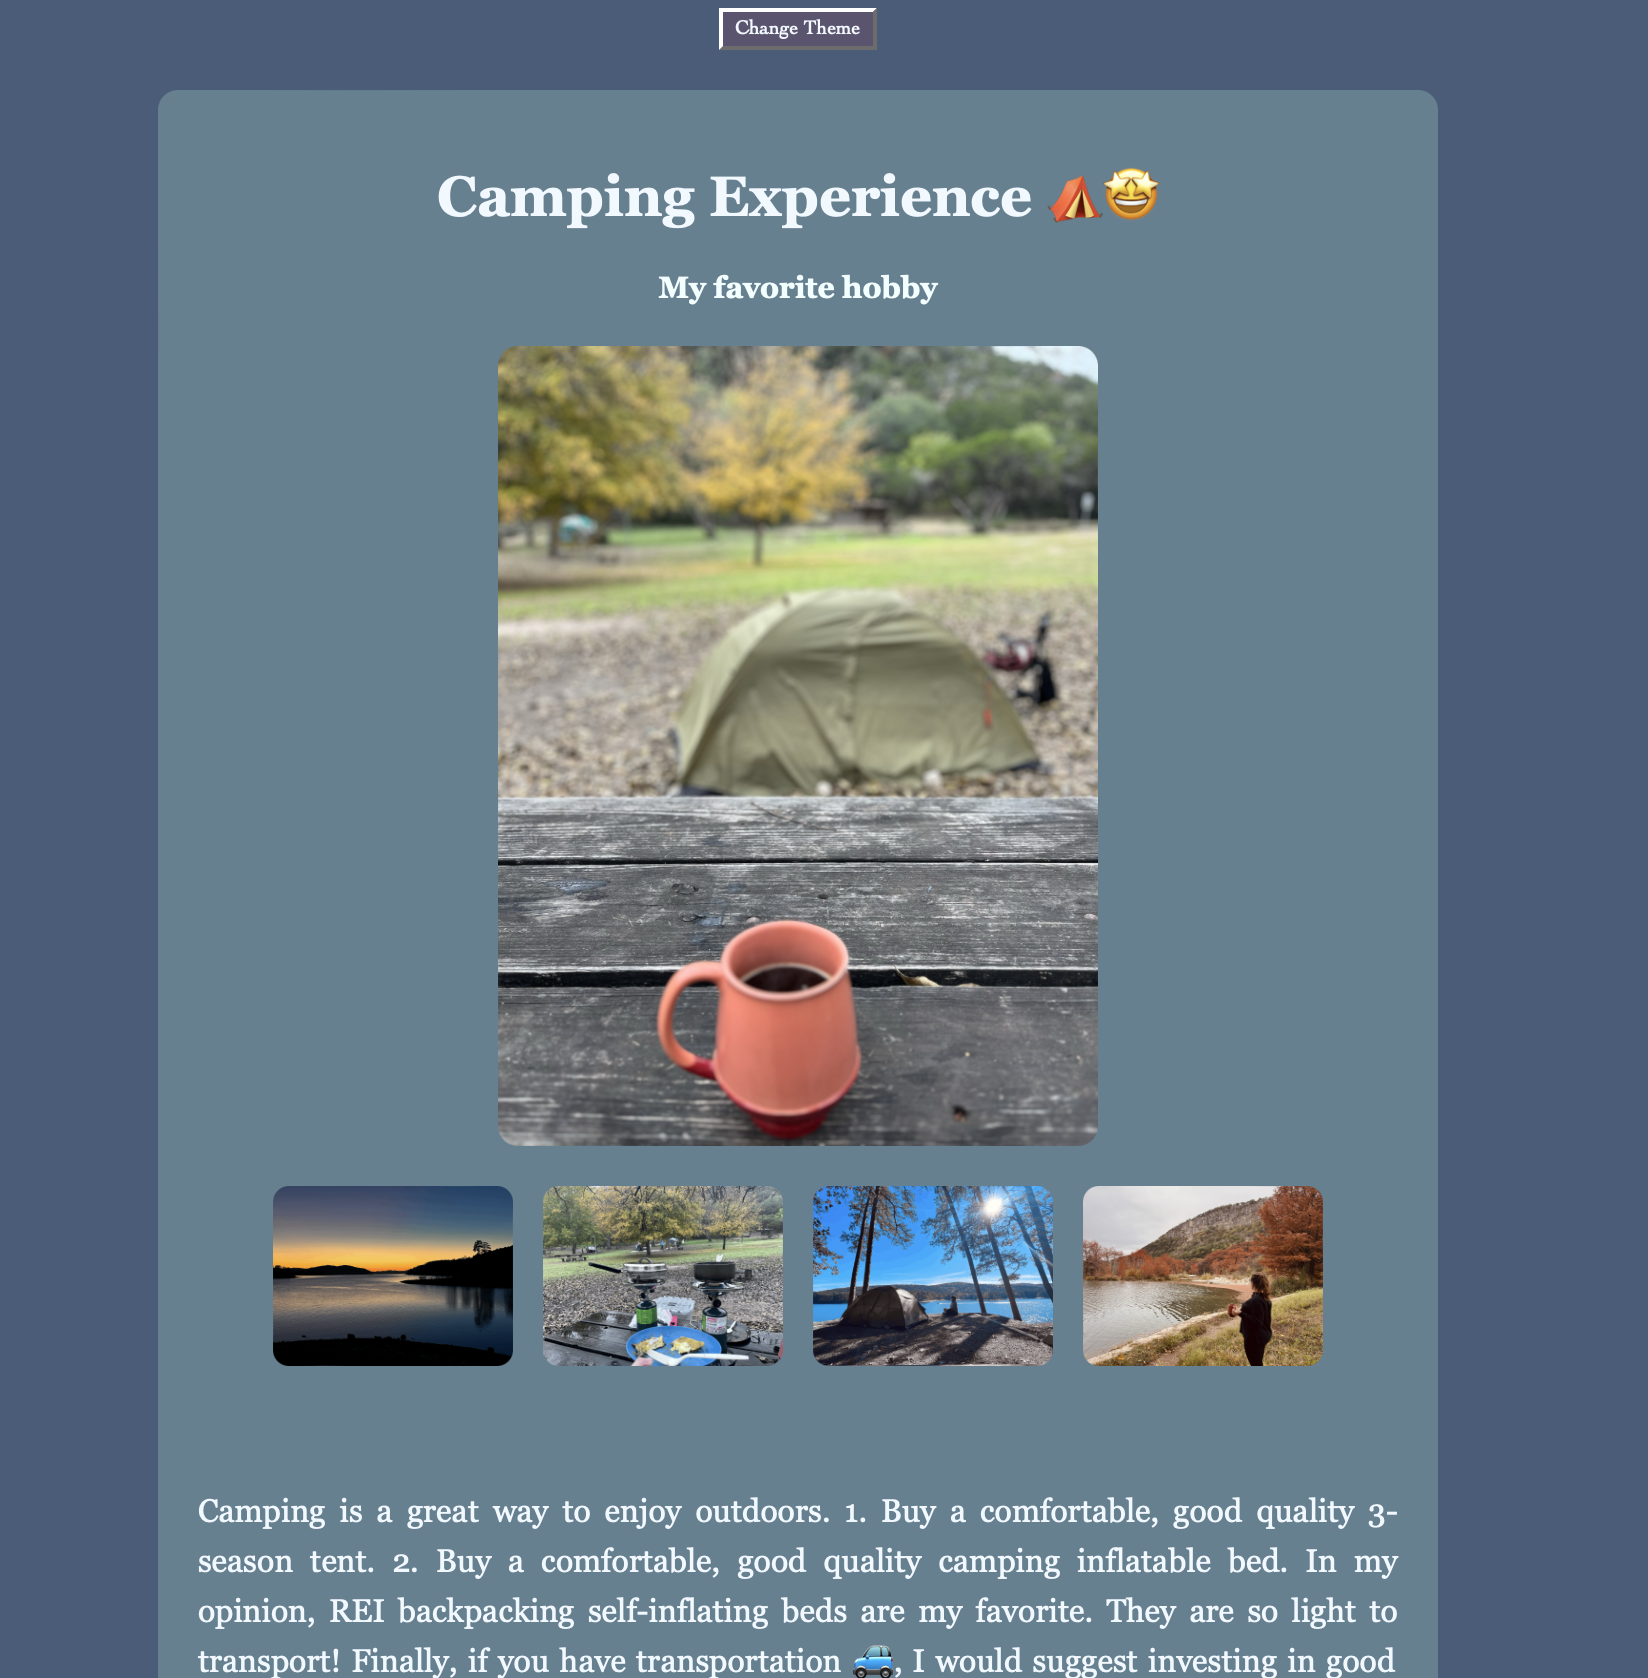 A screenshot of a camping website with a color contrast button.